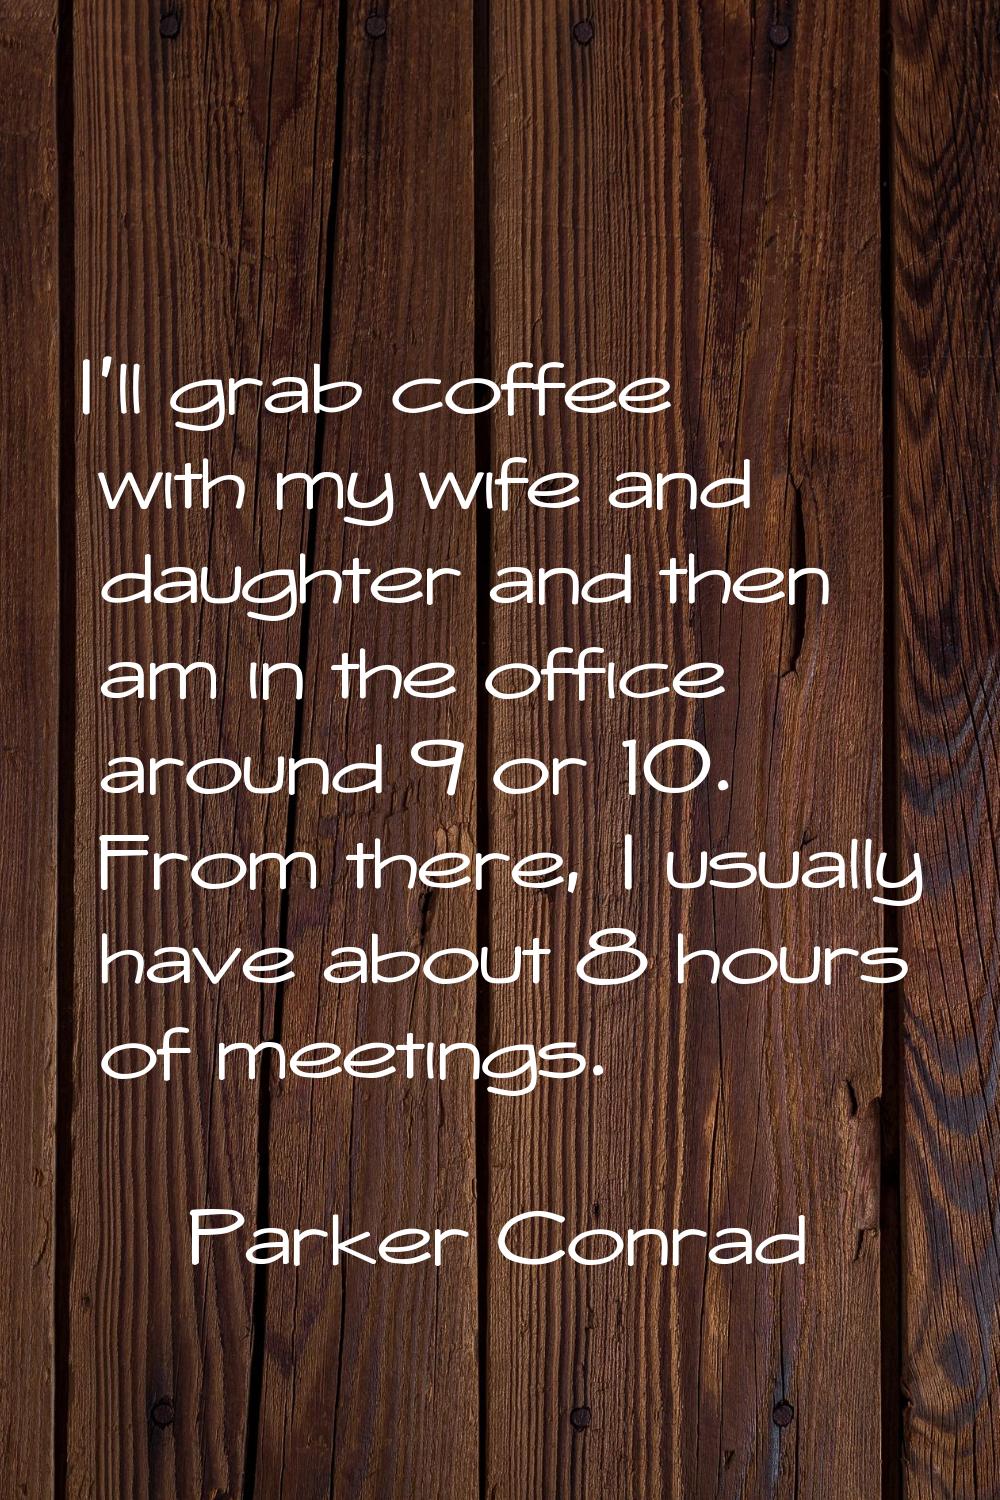 I'll grab coffee with my wife and daughter and then am in the office around 9 or 10. From there, I 